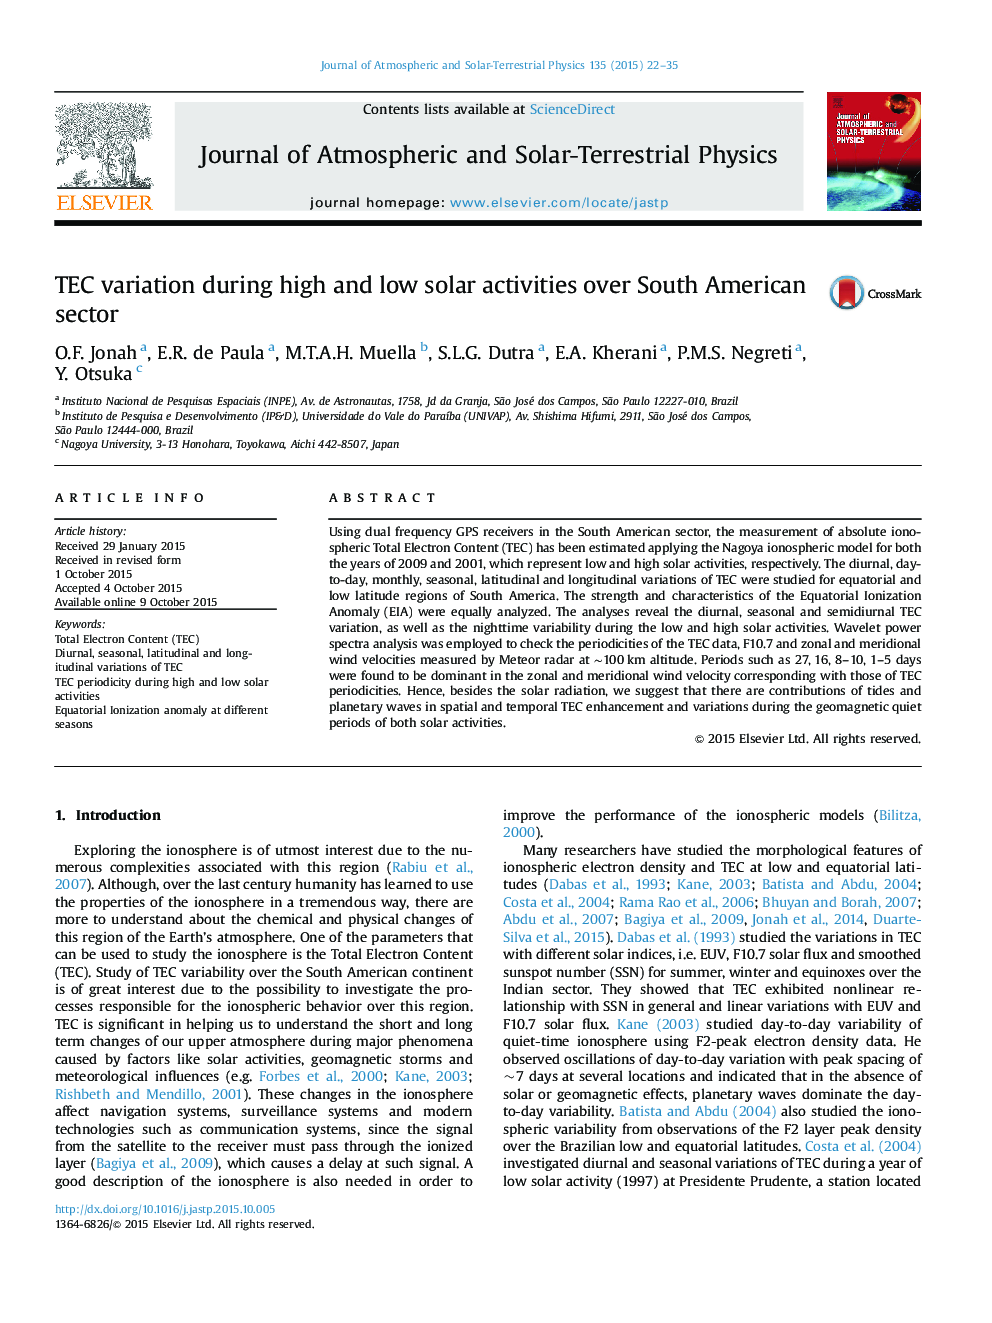 TEC variation during high and low solar activities over South American sector